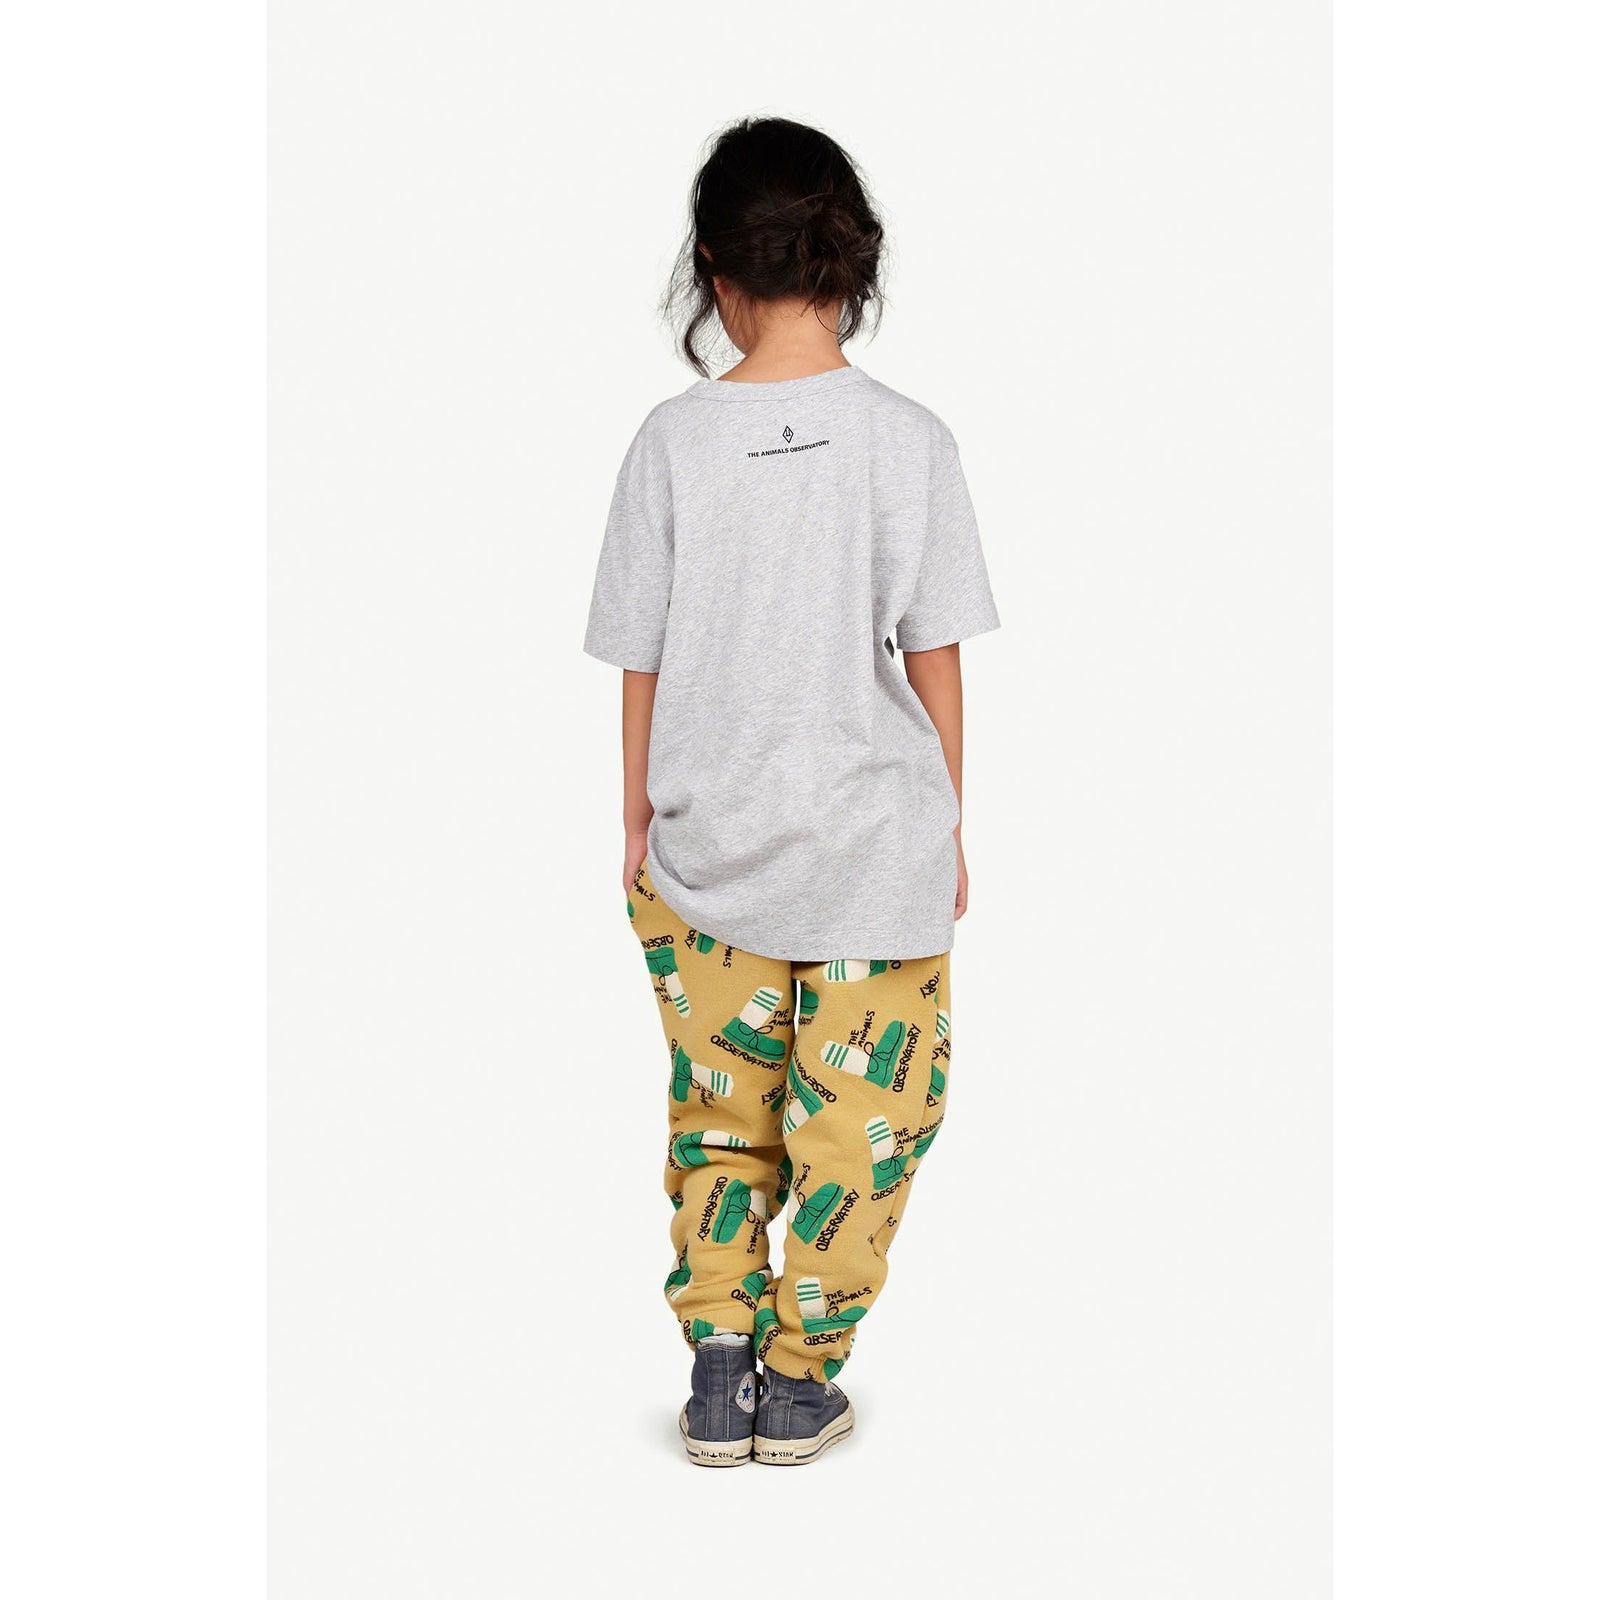 Big Rooster Kids T-Shirt - Grey - Buckets and Spades